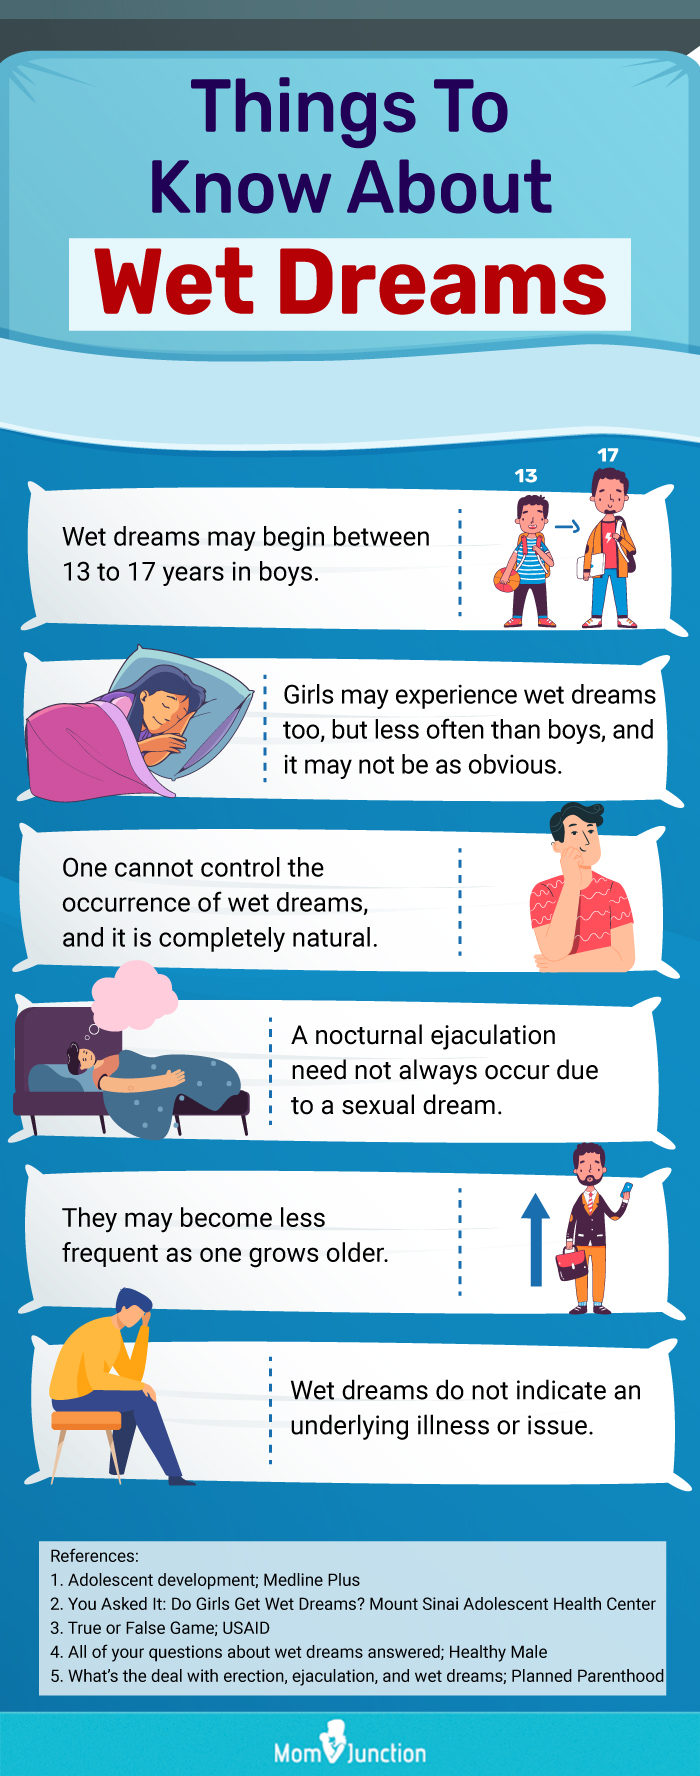 Do teen girls and boys have wet dreams? picture image